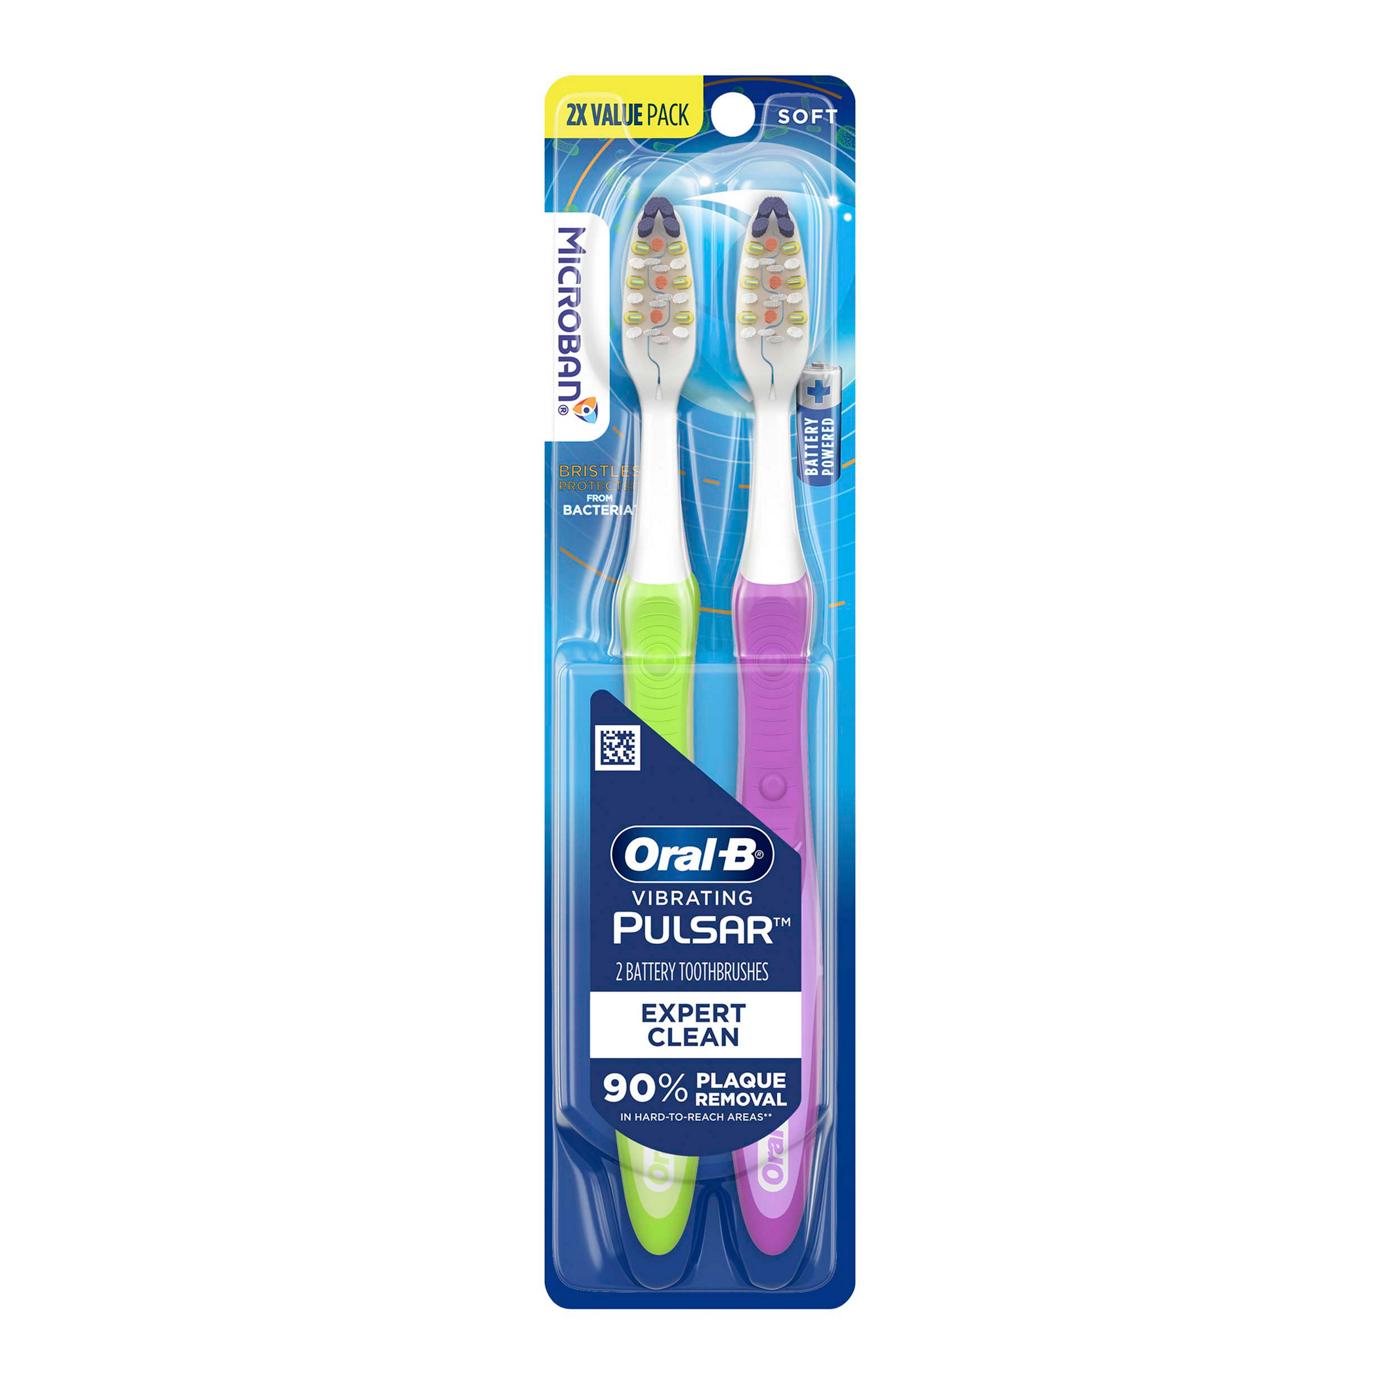 Oral-B Pulsar Expert Clean Battery Soft Toothbrushes; image 1 of 6